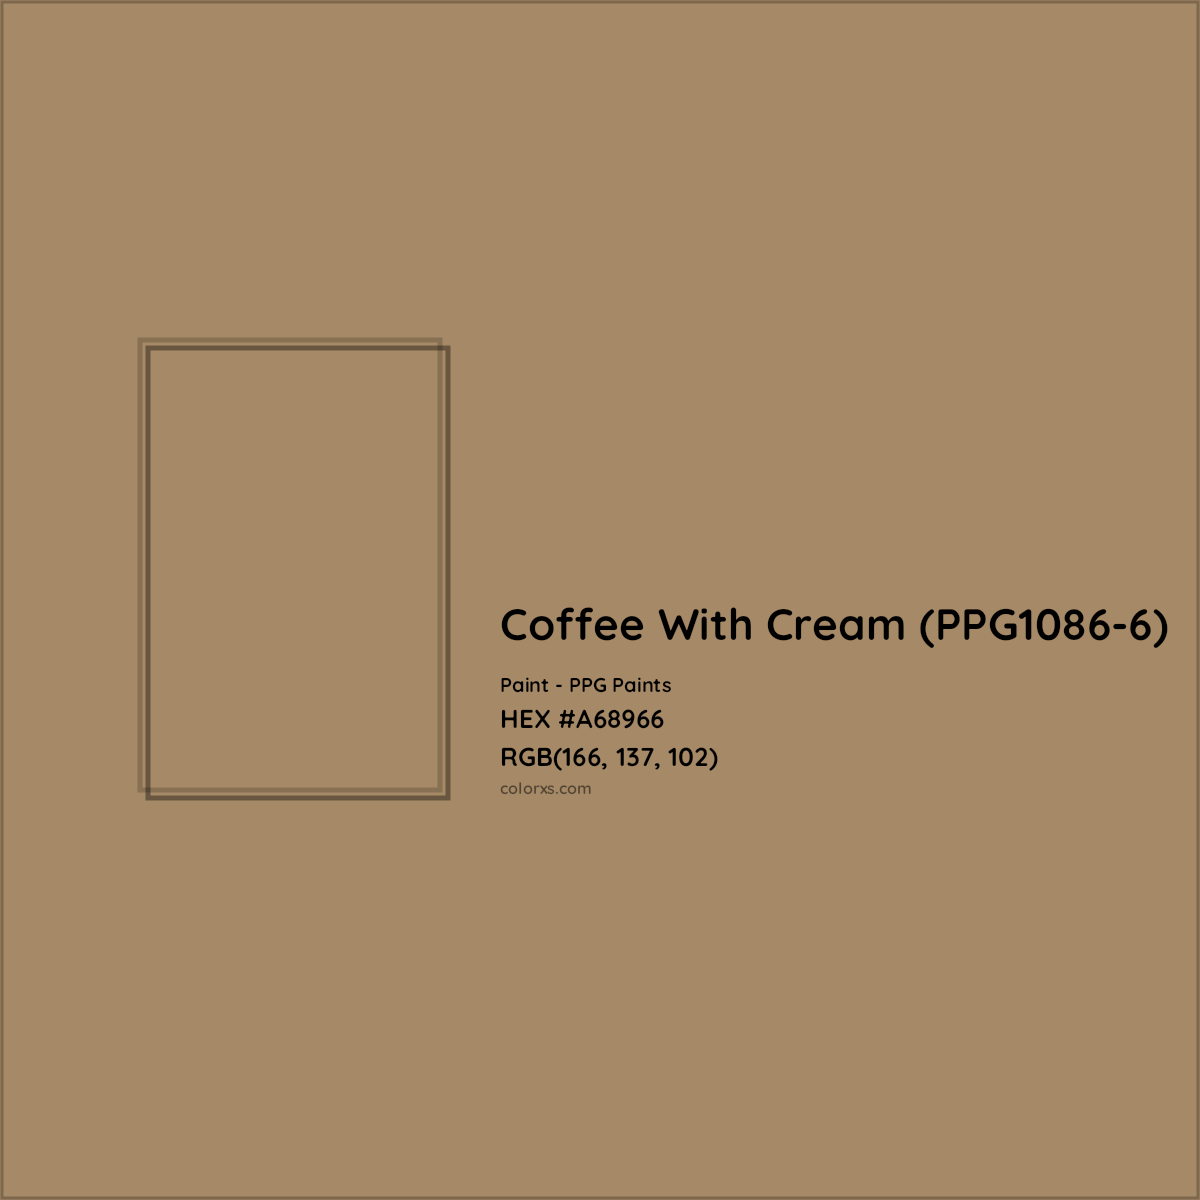 HEX #A68966 Coffee With Cream (PPG1086-6) Paint PPG Paints - Color Code